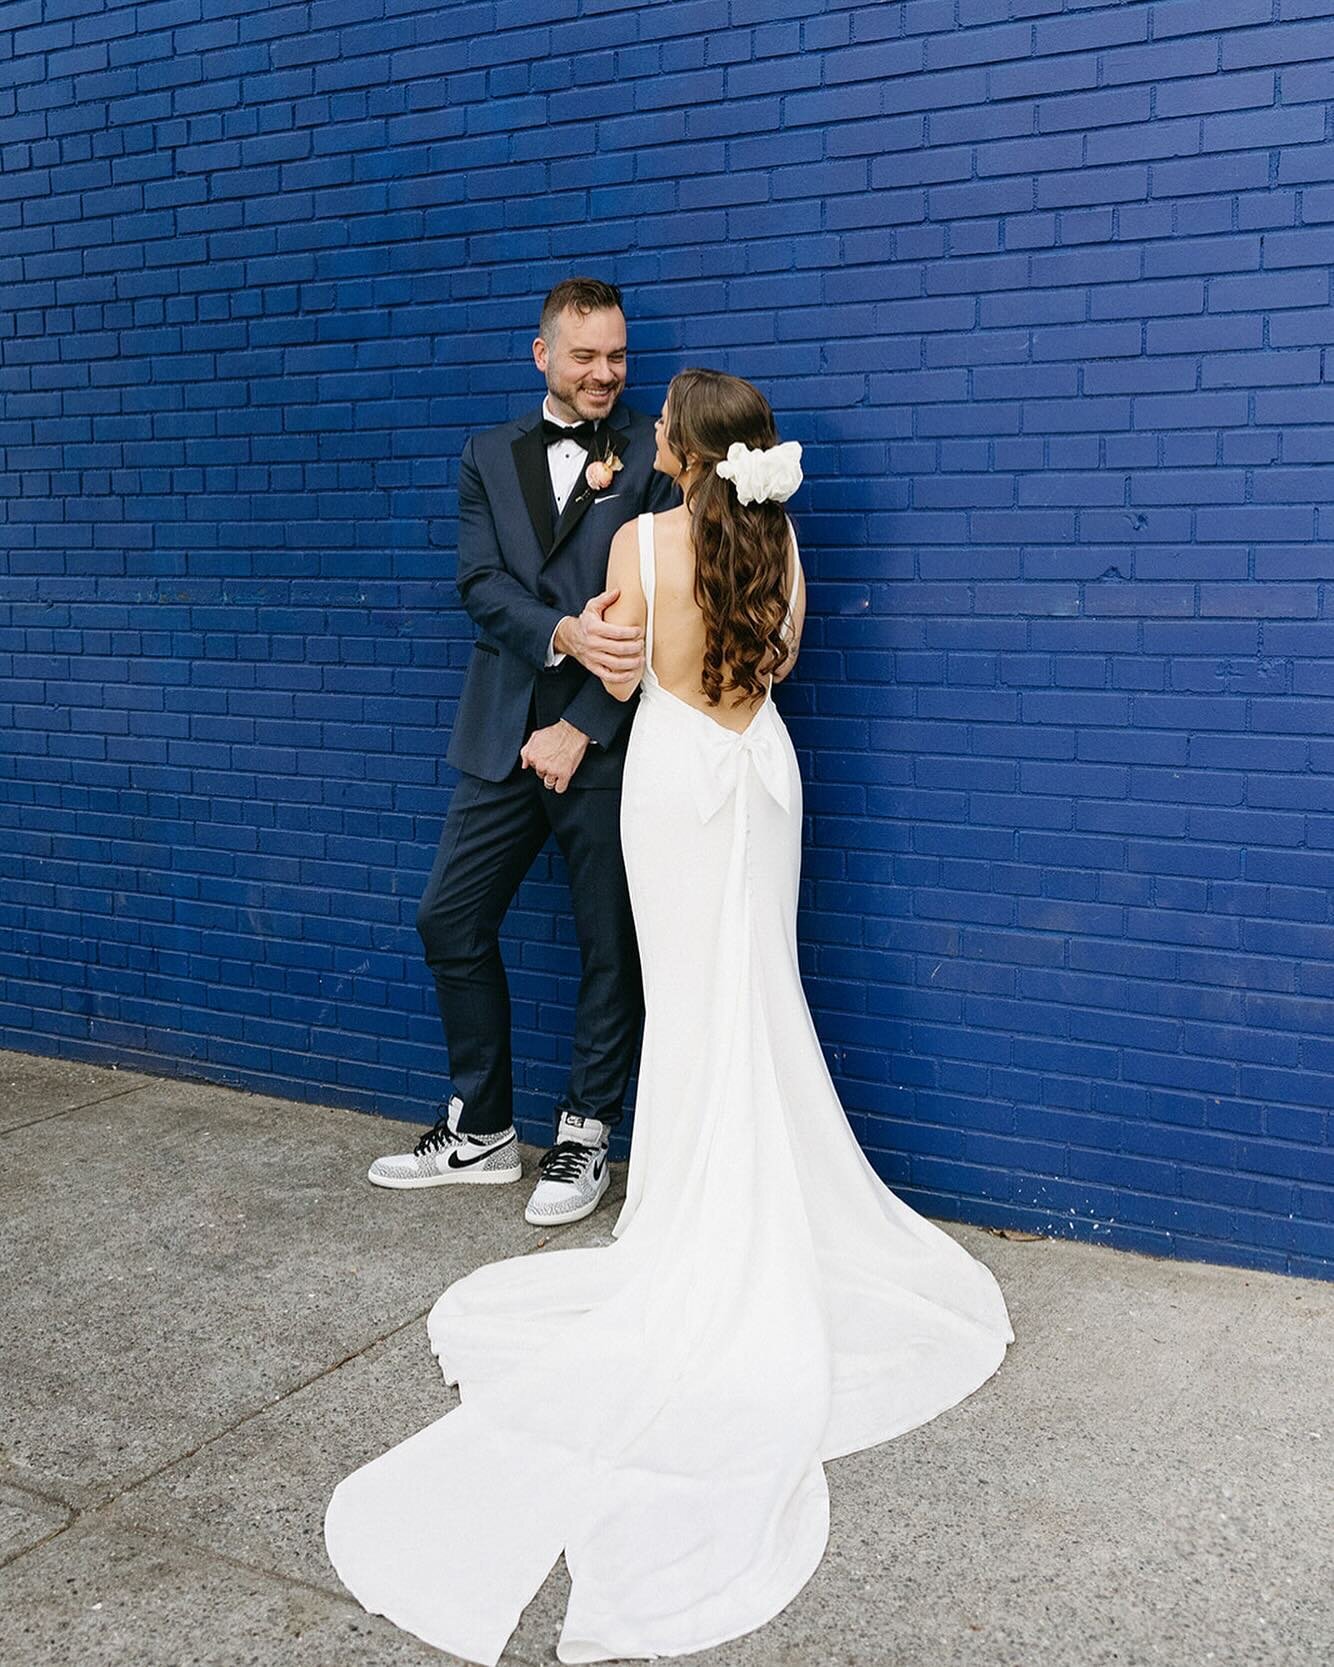 A moment for the back of the dress 😍💙

Coordination: Olivia of @merrybymia
Venue: @dobbinstnyc
Catering: @eventfull.nyc
DJ: @jaymcelfresh
Florist: @yellowbowflorals 
HMU: @styles_bymarcella
Photo &amp; Video: @sambufalo, @theotherdaystudios 
Graphi